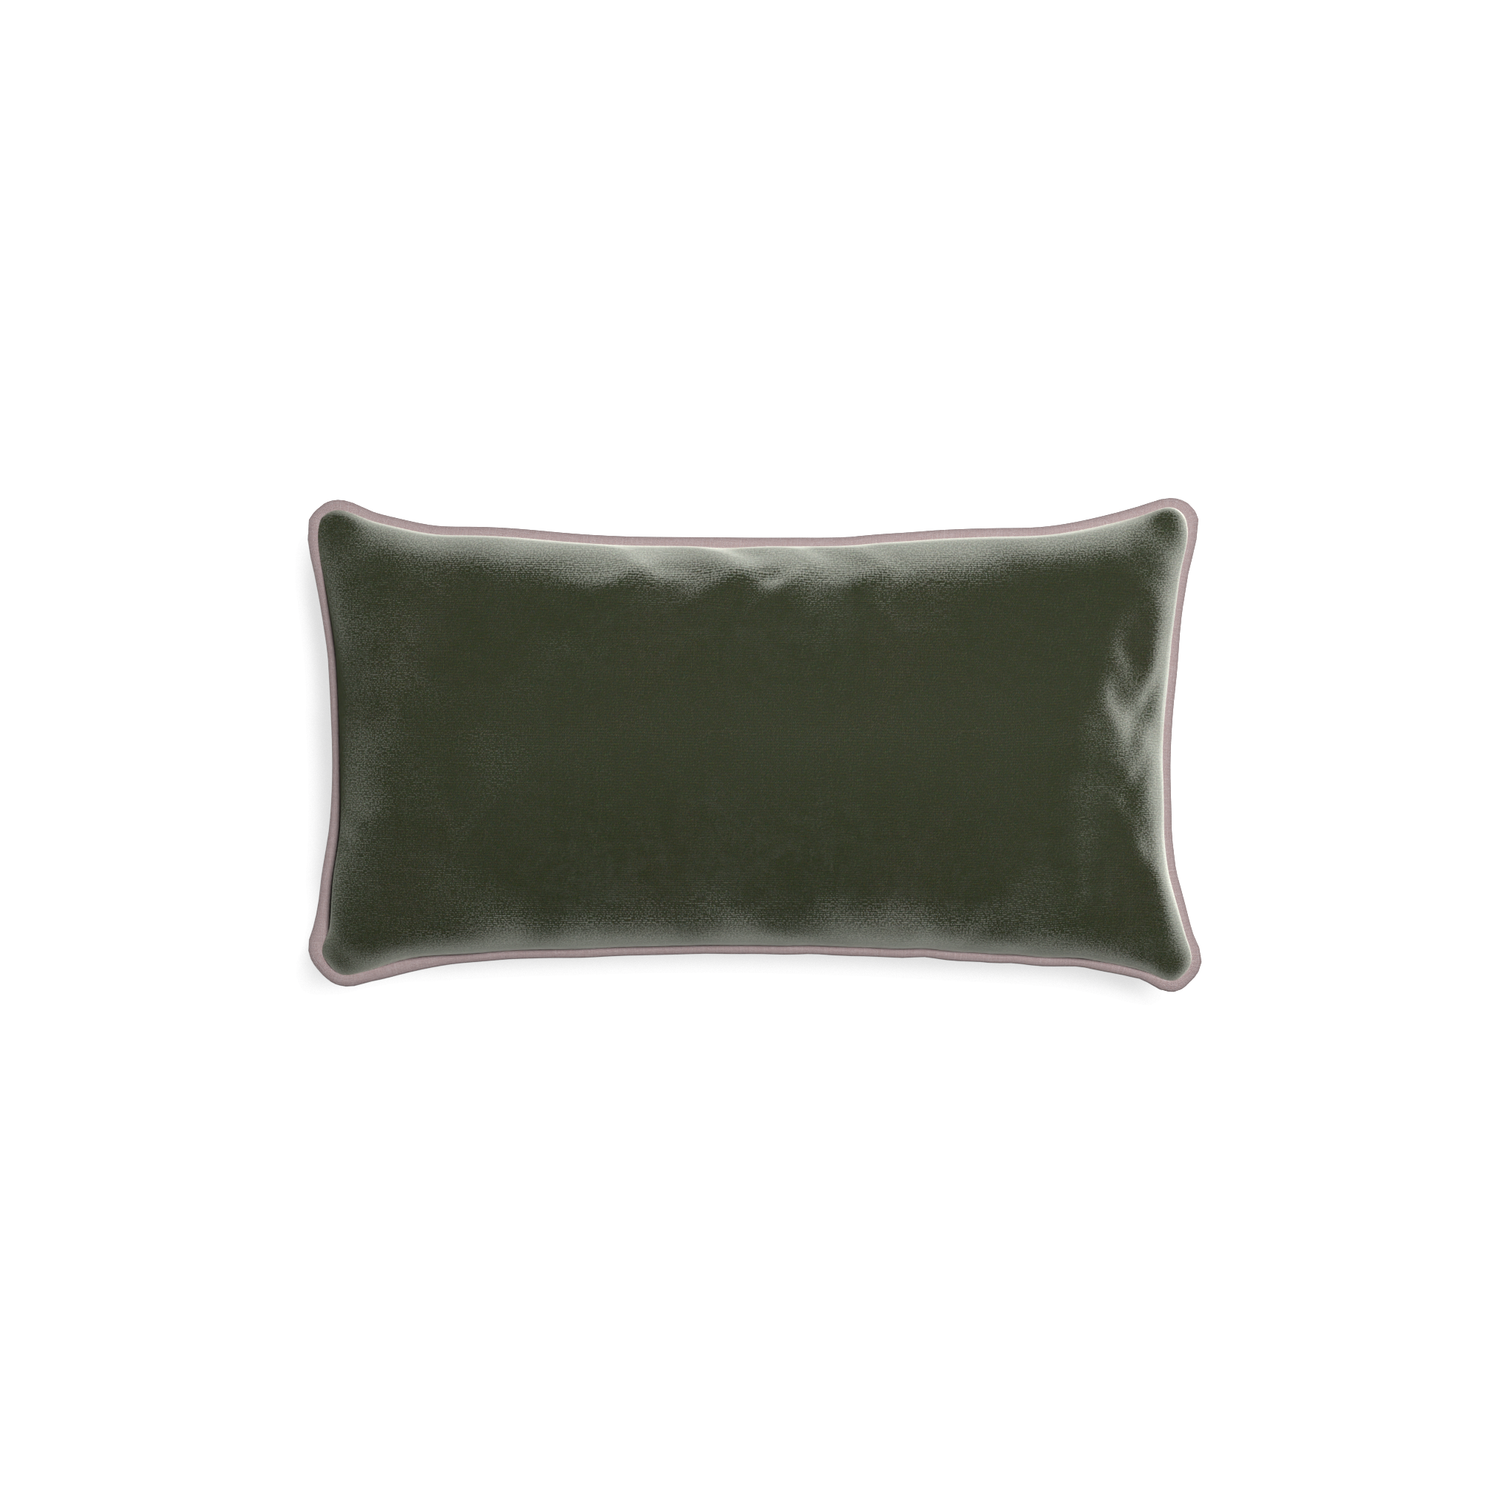 Petite-lumbar fern velvet custom fern greenpillow with orchid piping on white background